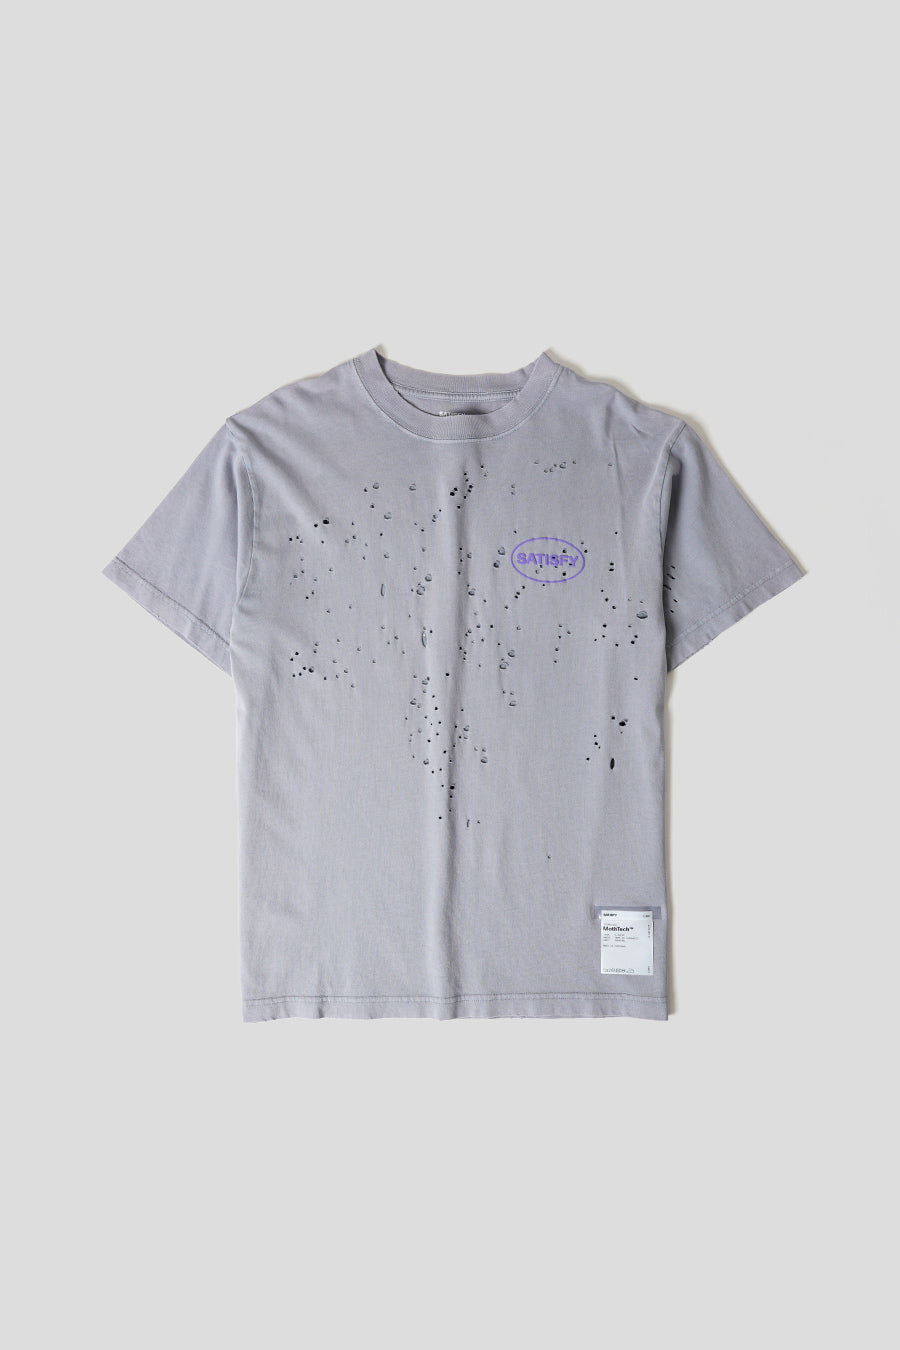 SATISFY - AGED SILVER MOTHTECH T-SHIRT - LE LABO STORE